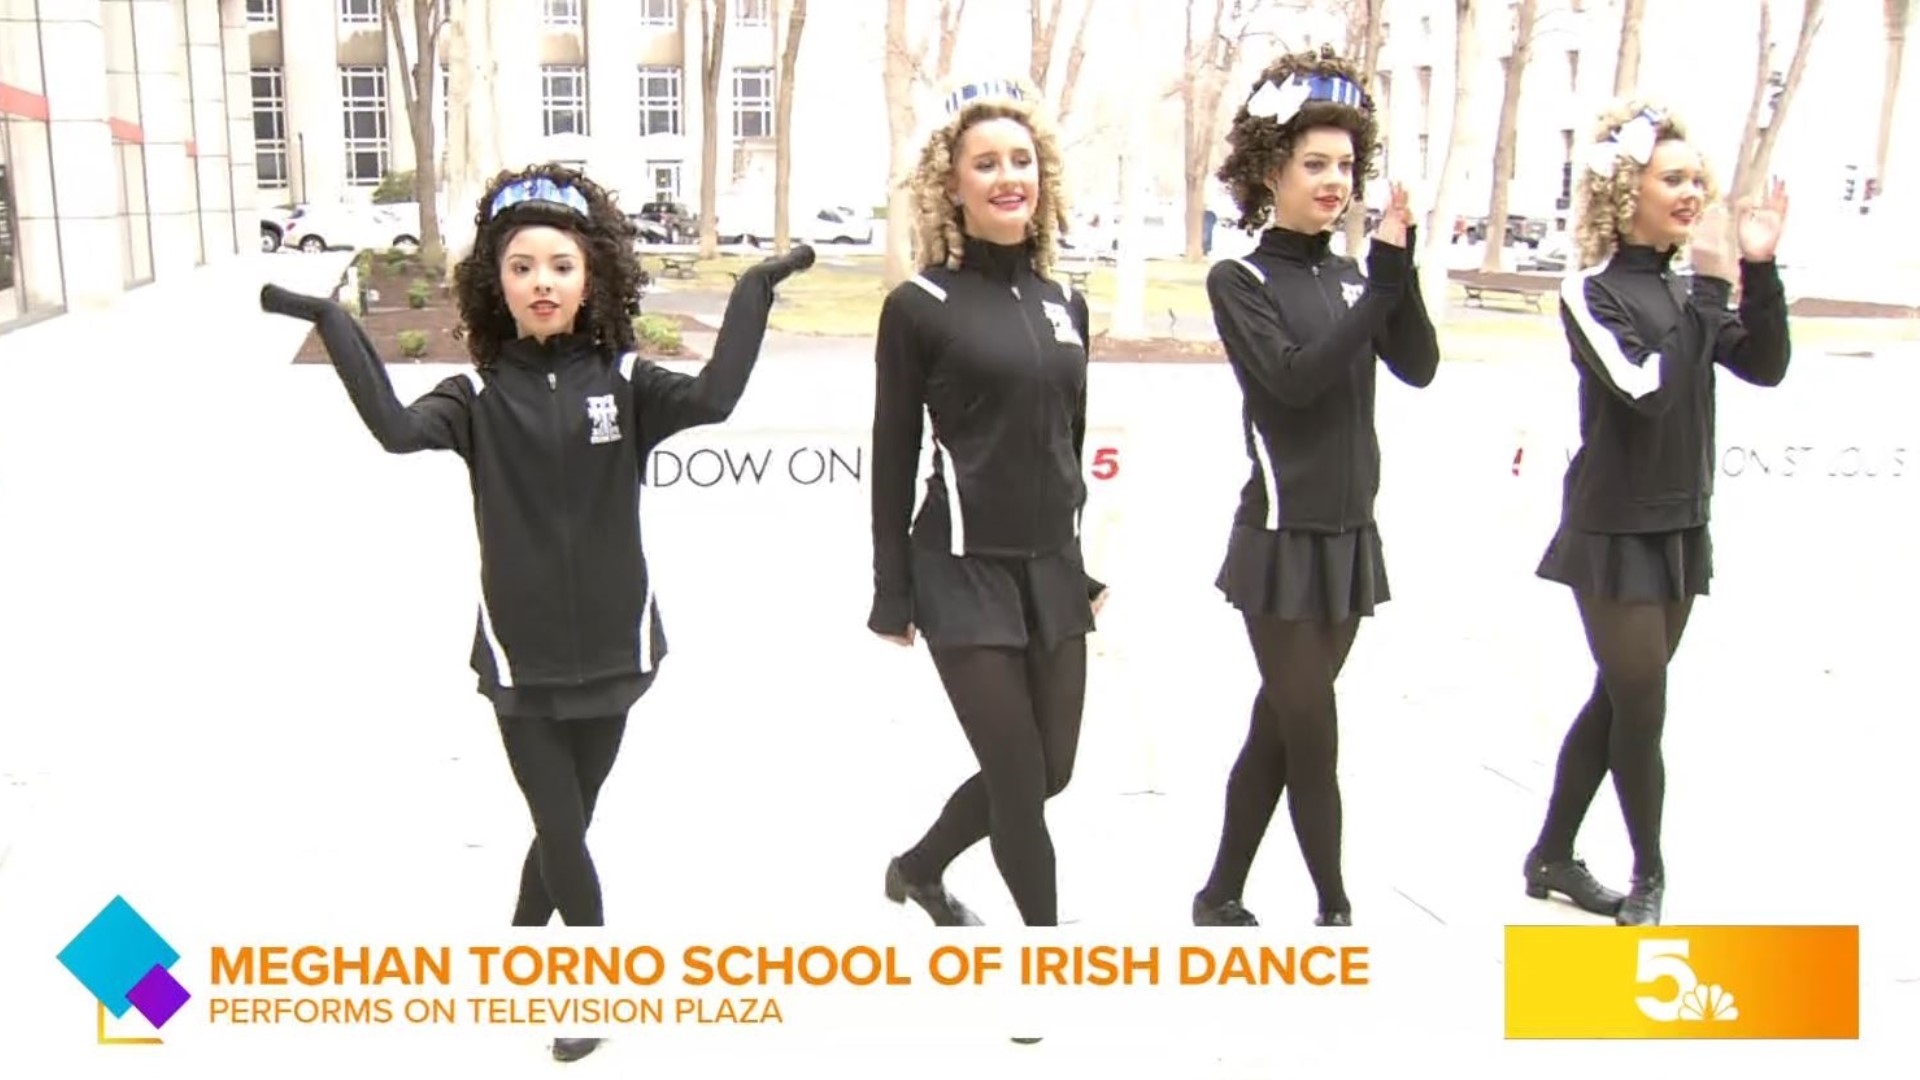 The Meghan Torno School of Irish Dance joins us on Television Plaza for a live performance